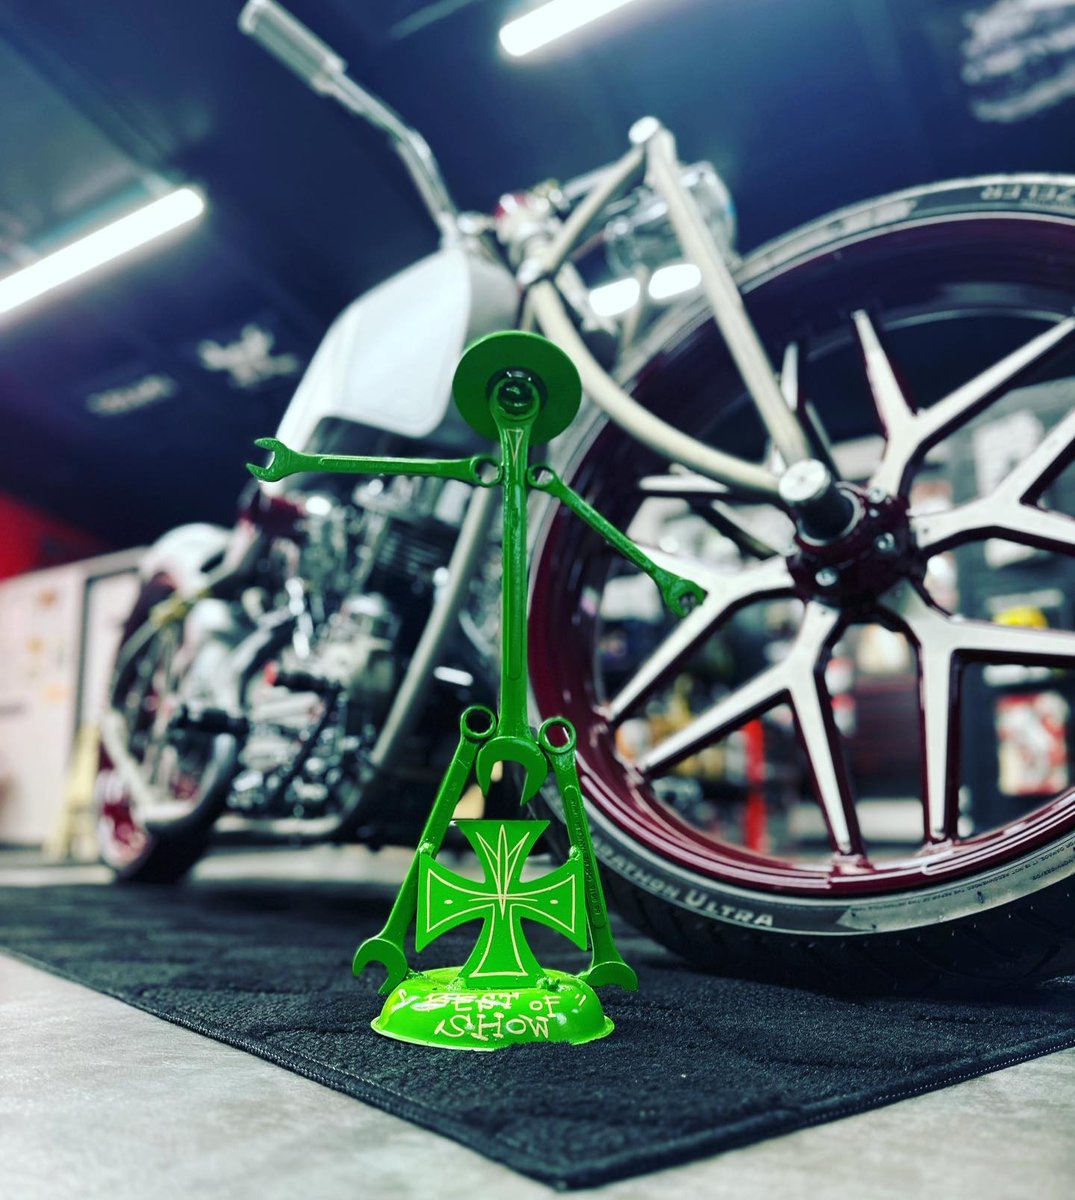 Trying to figure out which one is cooler, the bike or the Trophy. The custom-painted GT3 wheel is definitely sharp looking.

#smtwheels #ridewiththebest #topshelf #motorcycle #custom #showquality #trackperformance